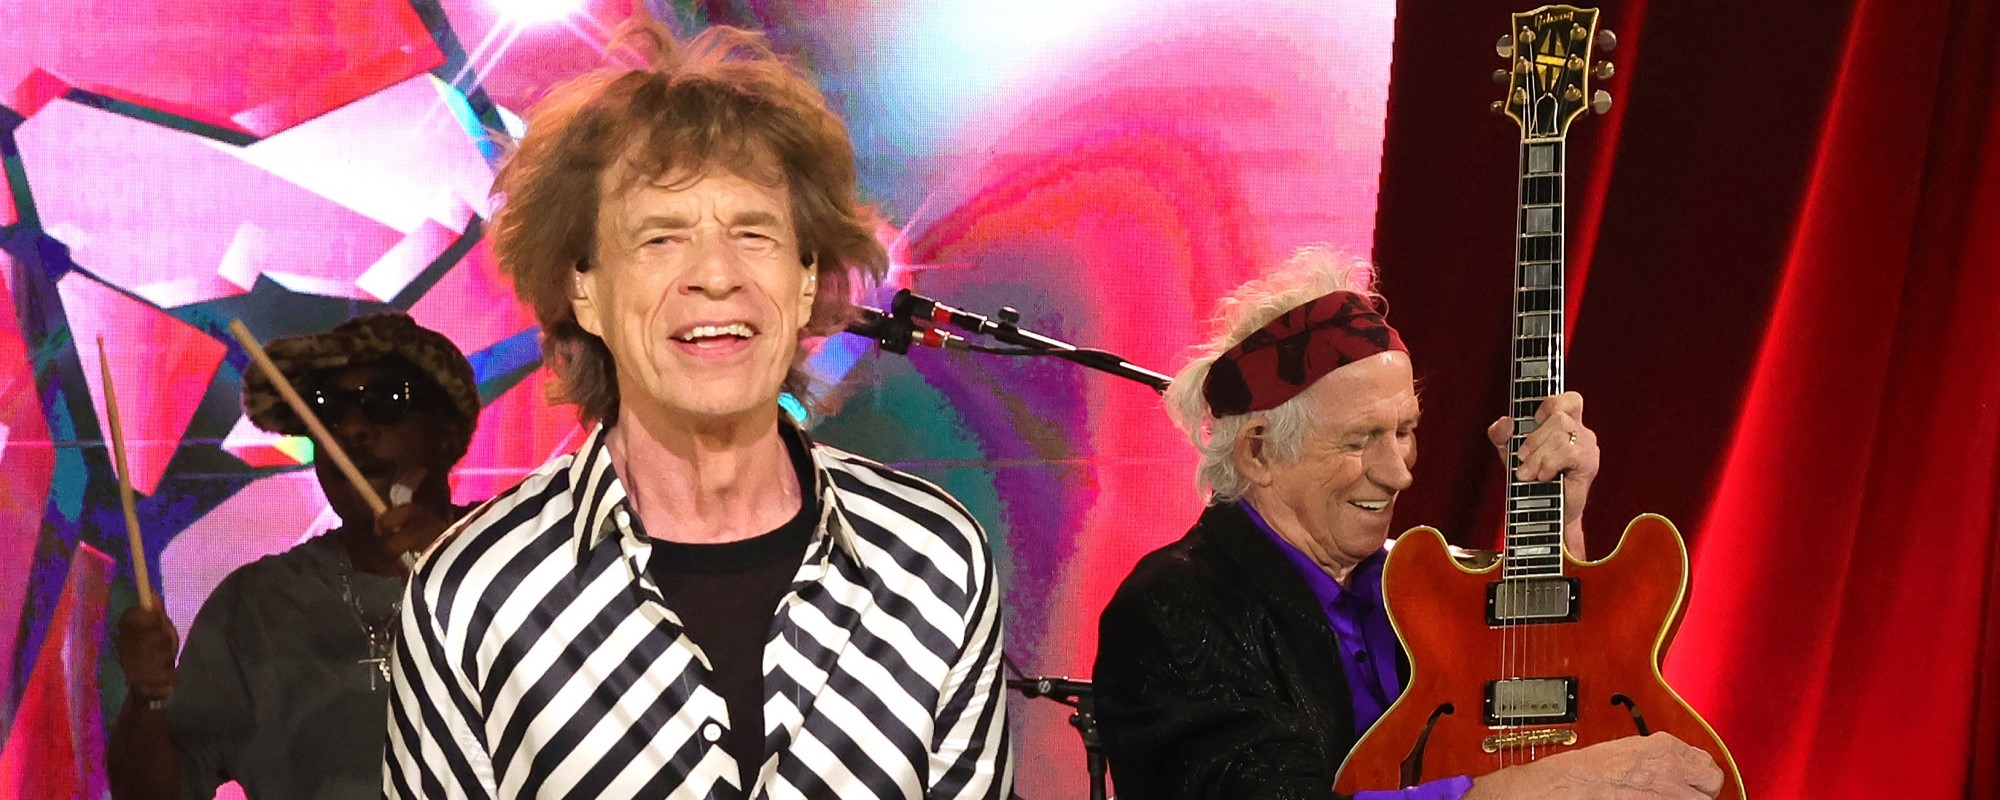 Houston, We Have a Rock Star: Mick Jagger Visits NASA’s Johnson Space Center Before Rolling Stones Tour Kickoff